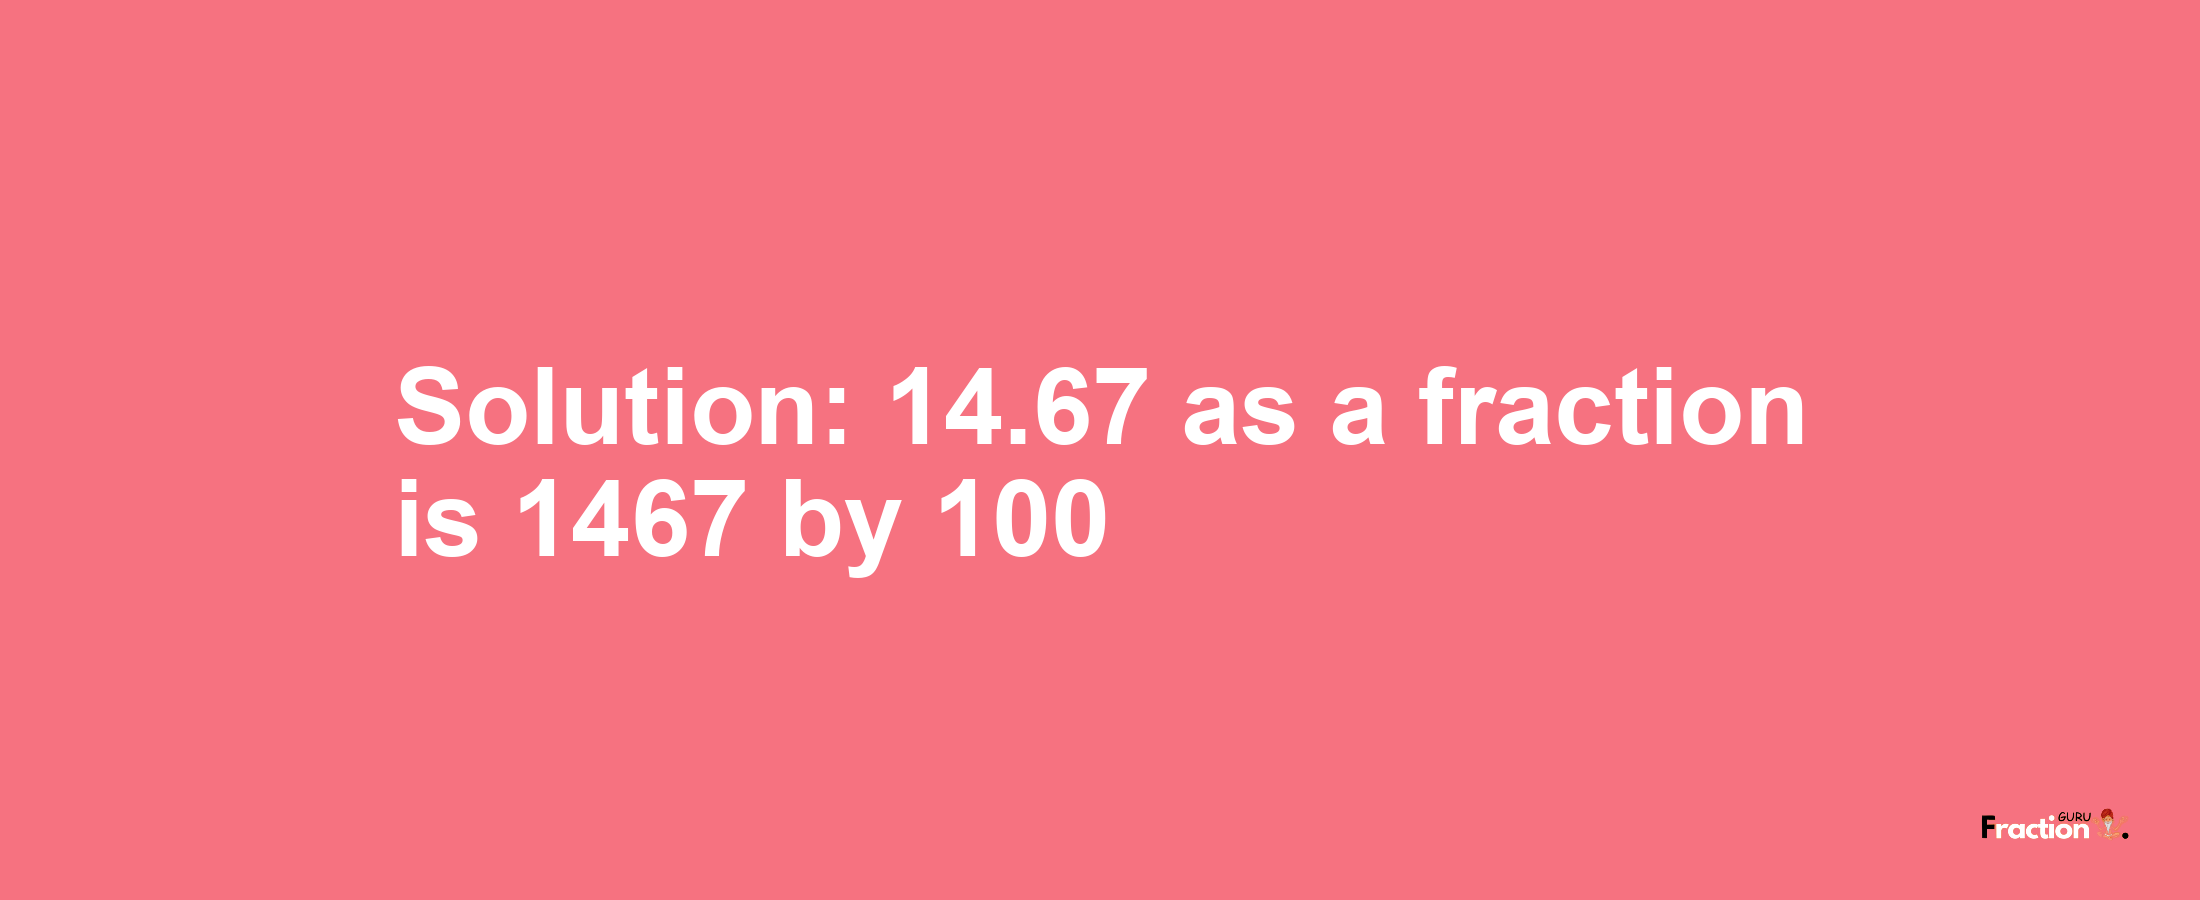 Solution:14.67 as a fraction is 1467/100